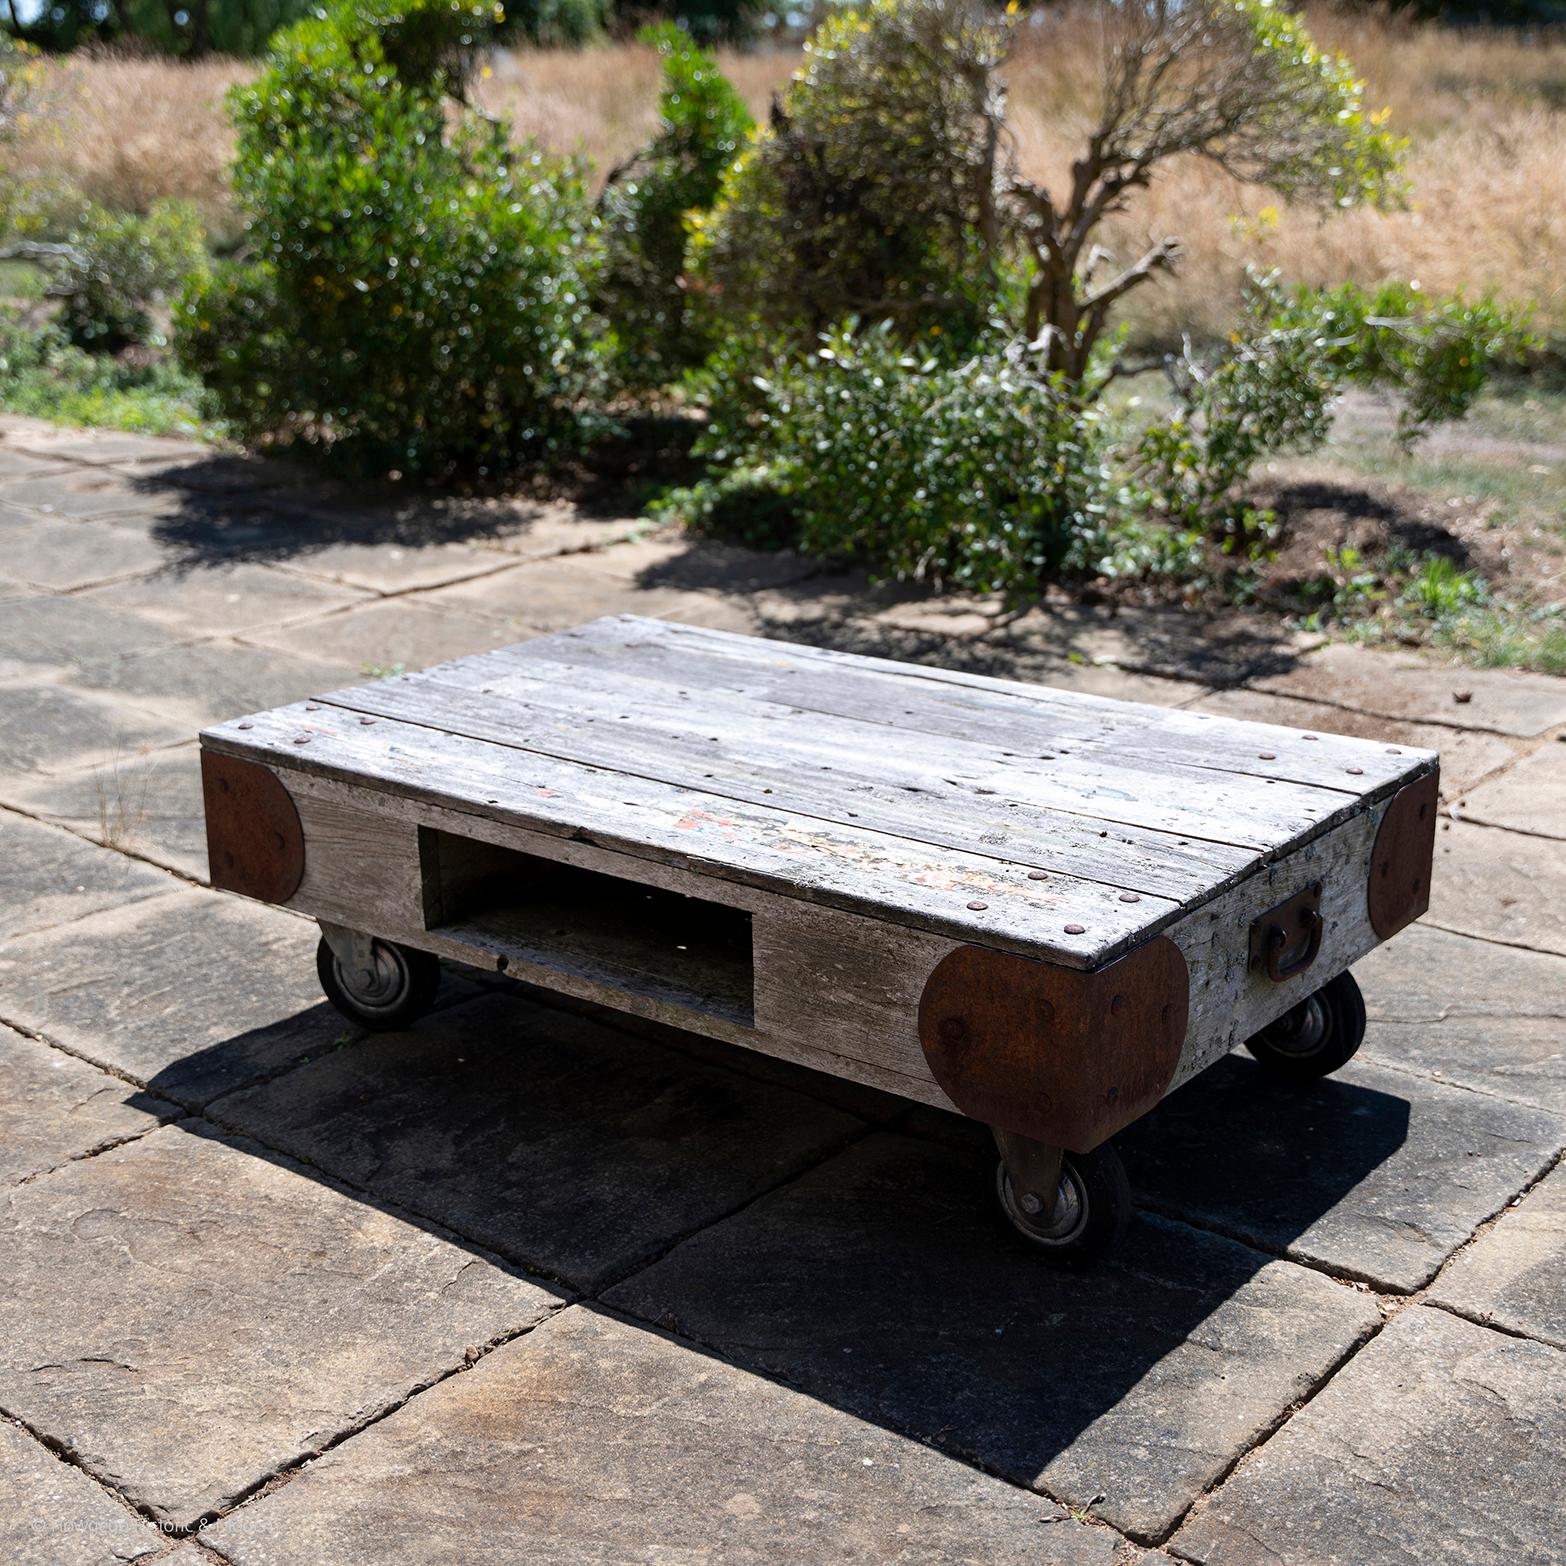 An unusual and characterful teak table with a recess for storage on lockable castors suitable for outside use in the garden, patio, conservatory. Weathered to a beautiful silver grey wit traces of old paint and paper on the top and durable. The